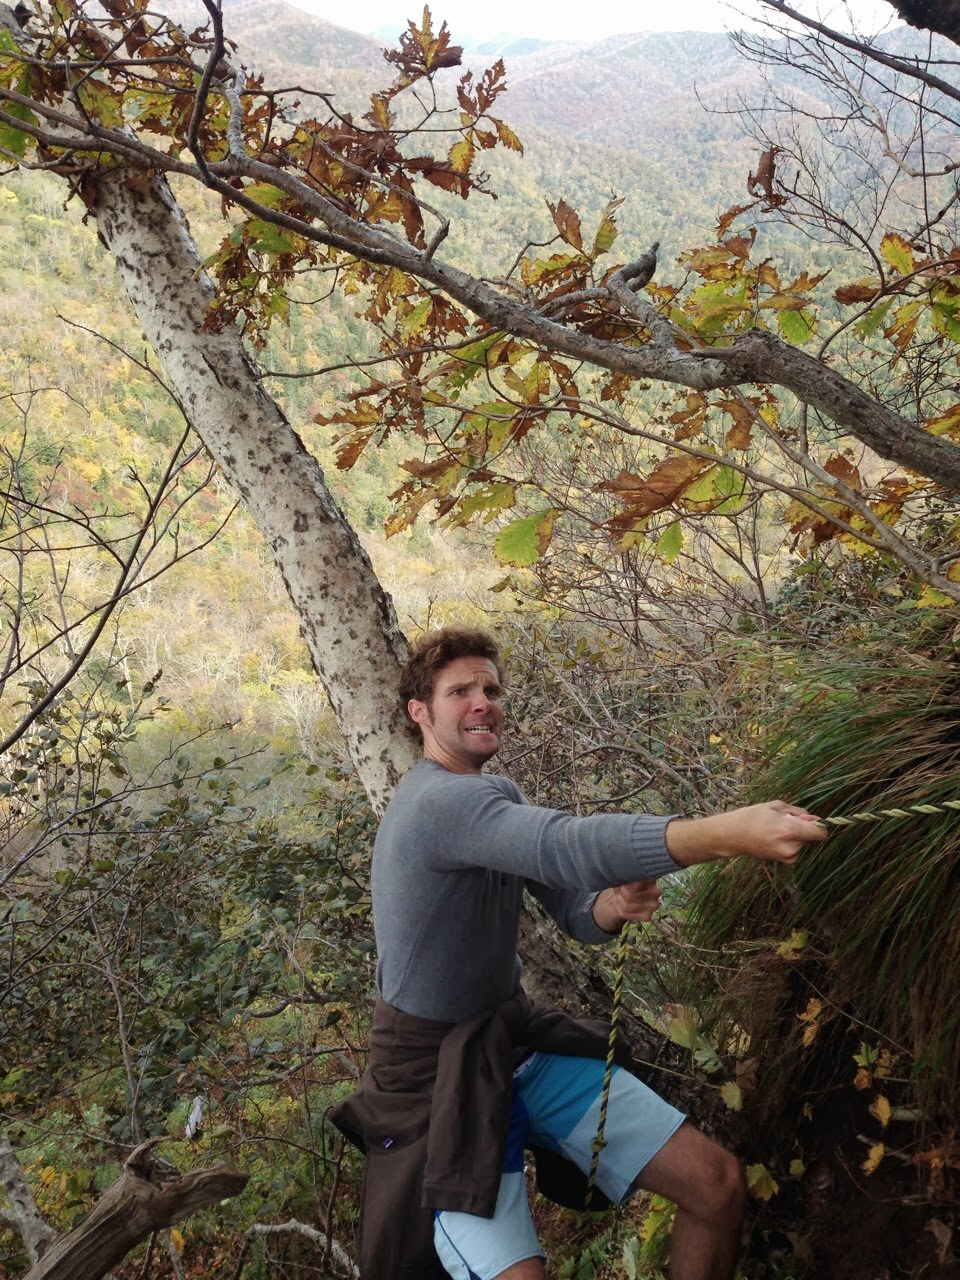 Me, hamming it up while pulling myself up a thin rope amid some trees and changing leaves on the side of the mountain